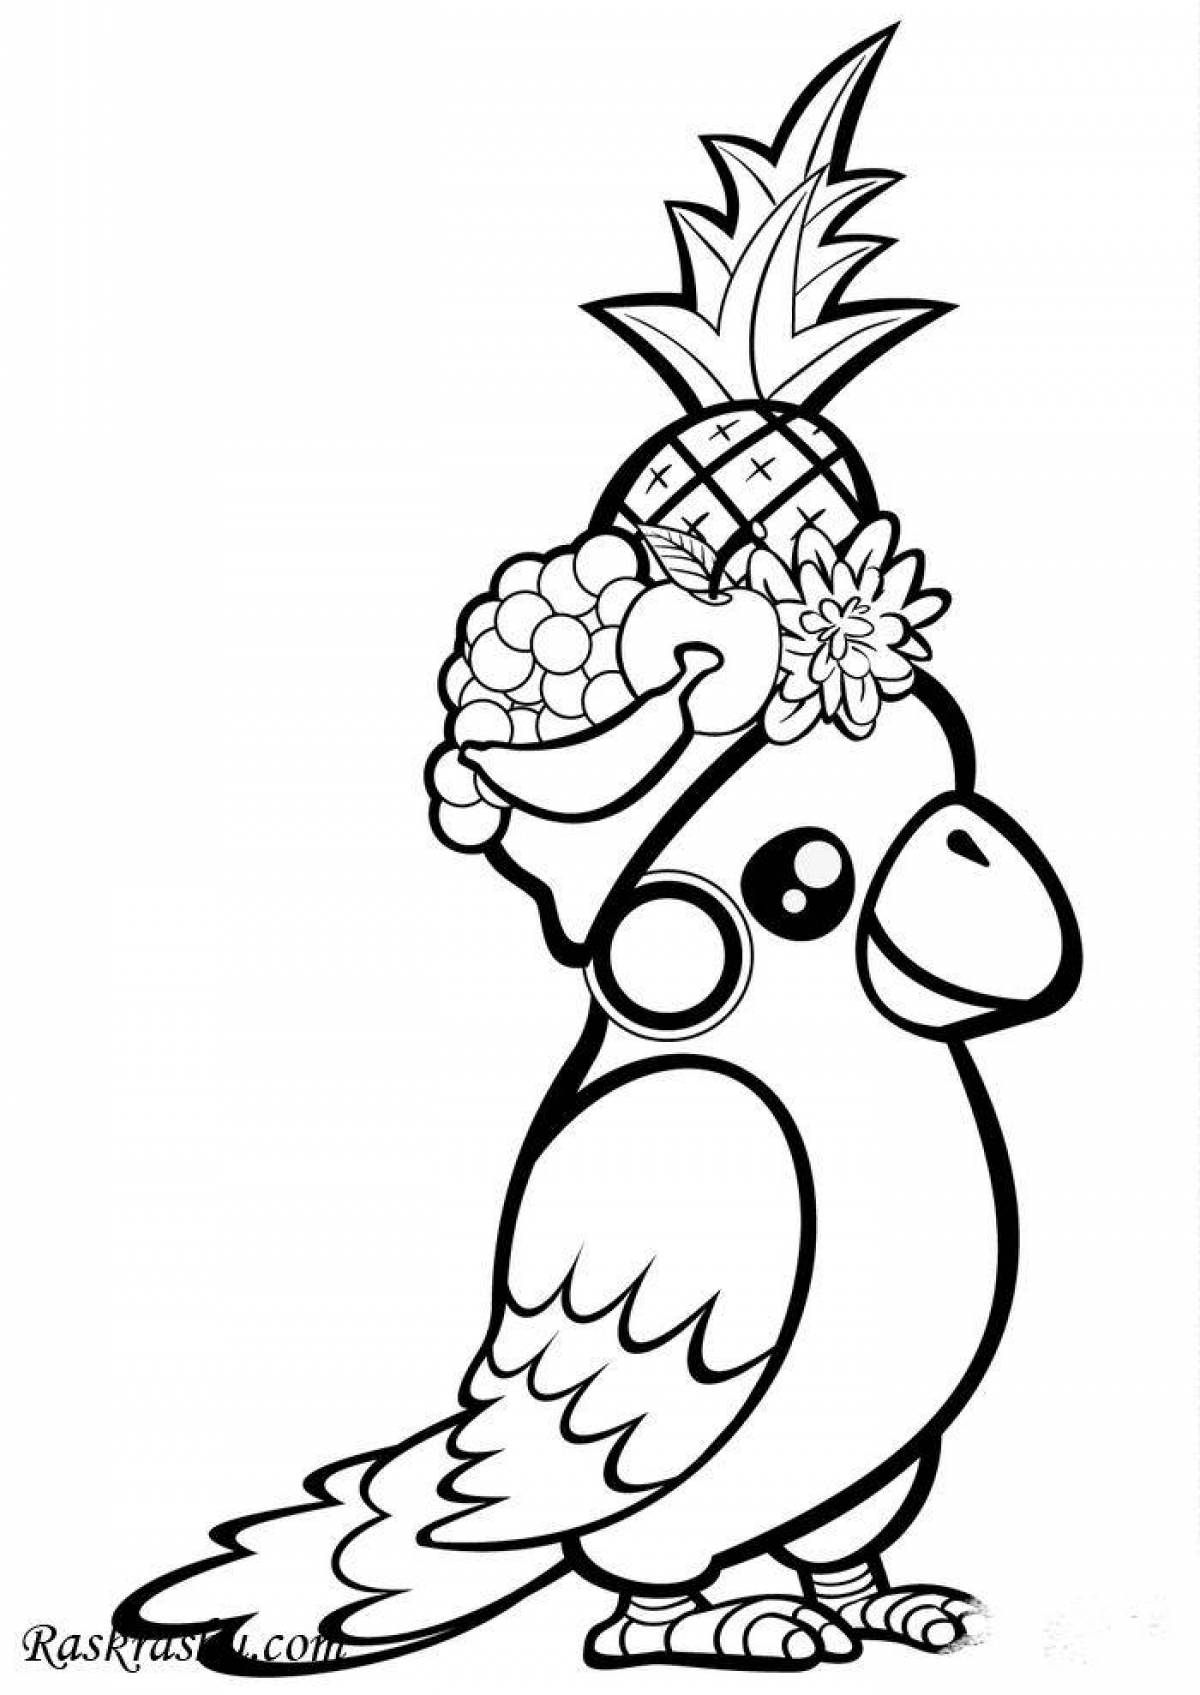 Fancy cockatoo coloring page